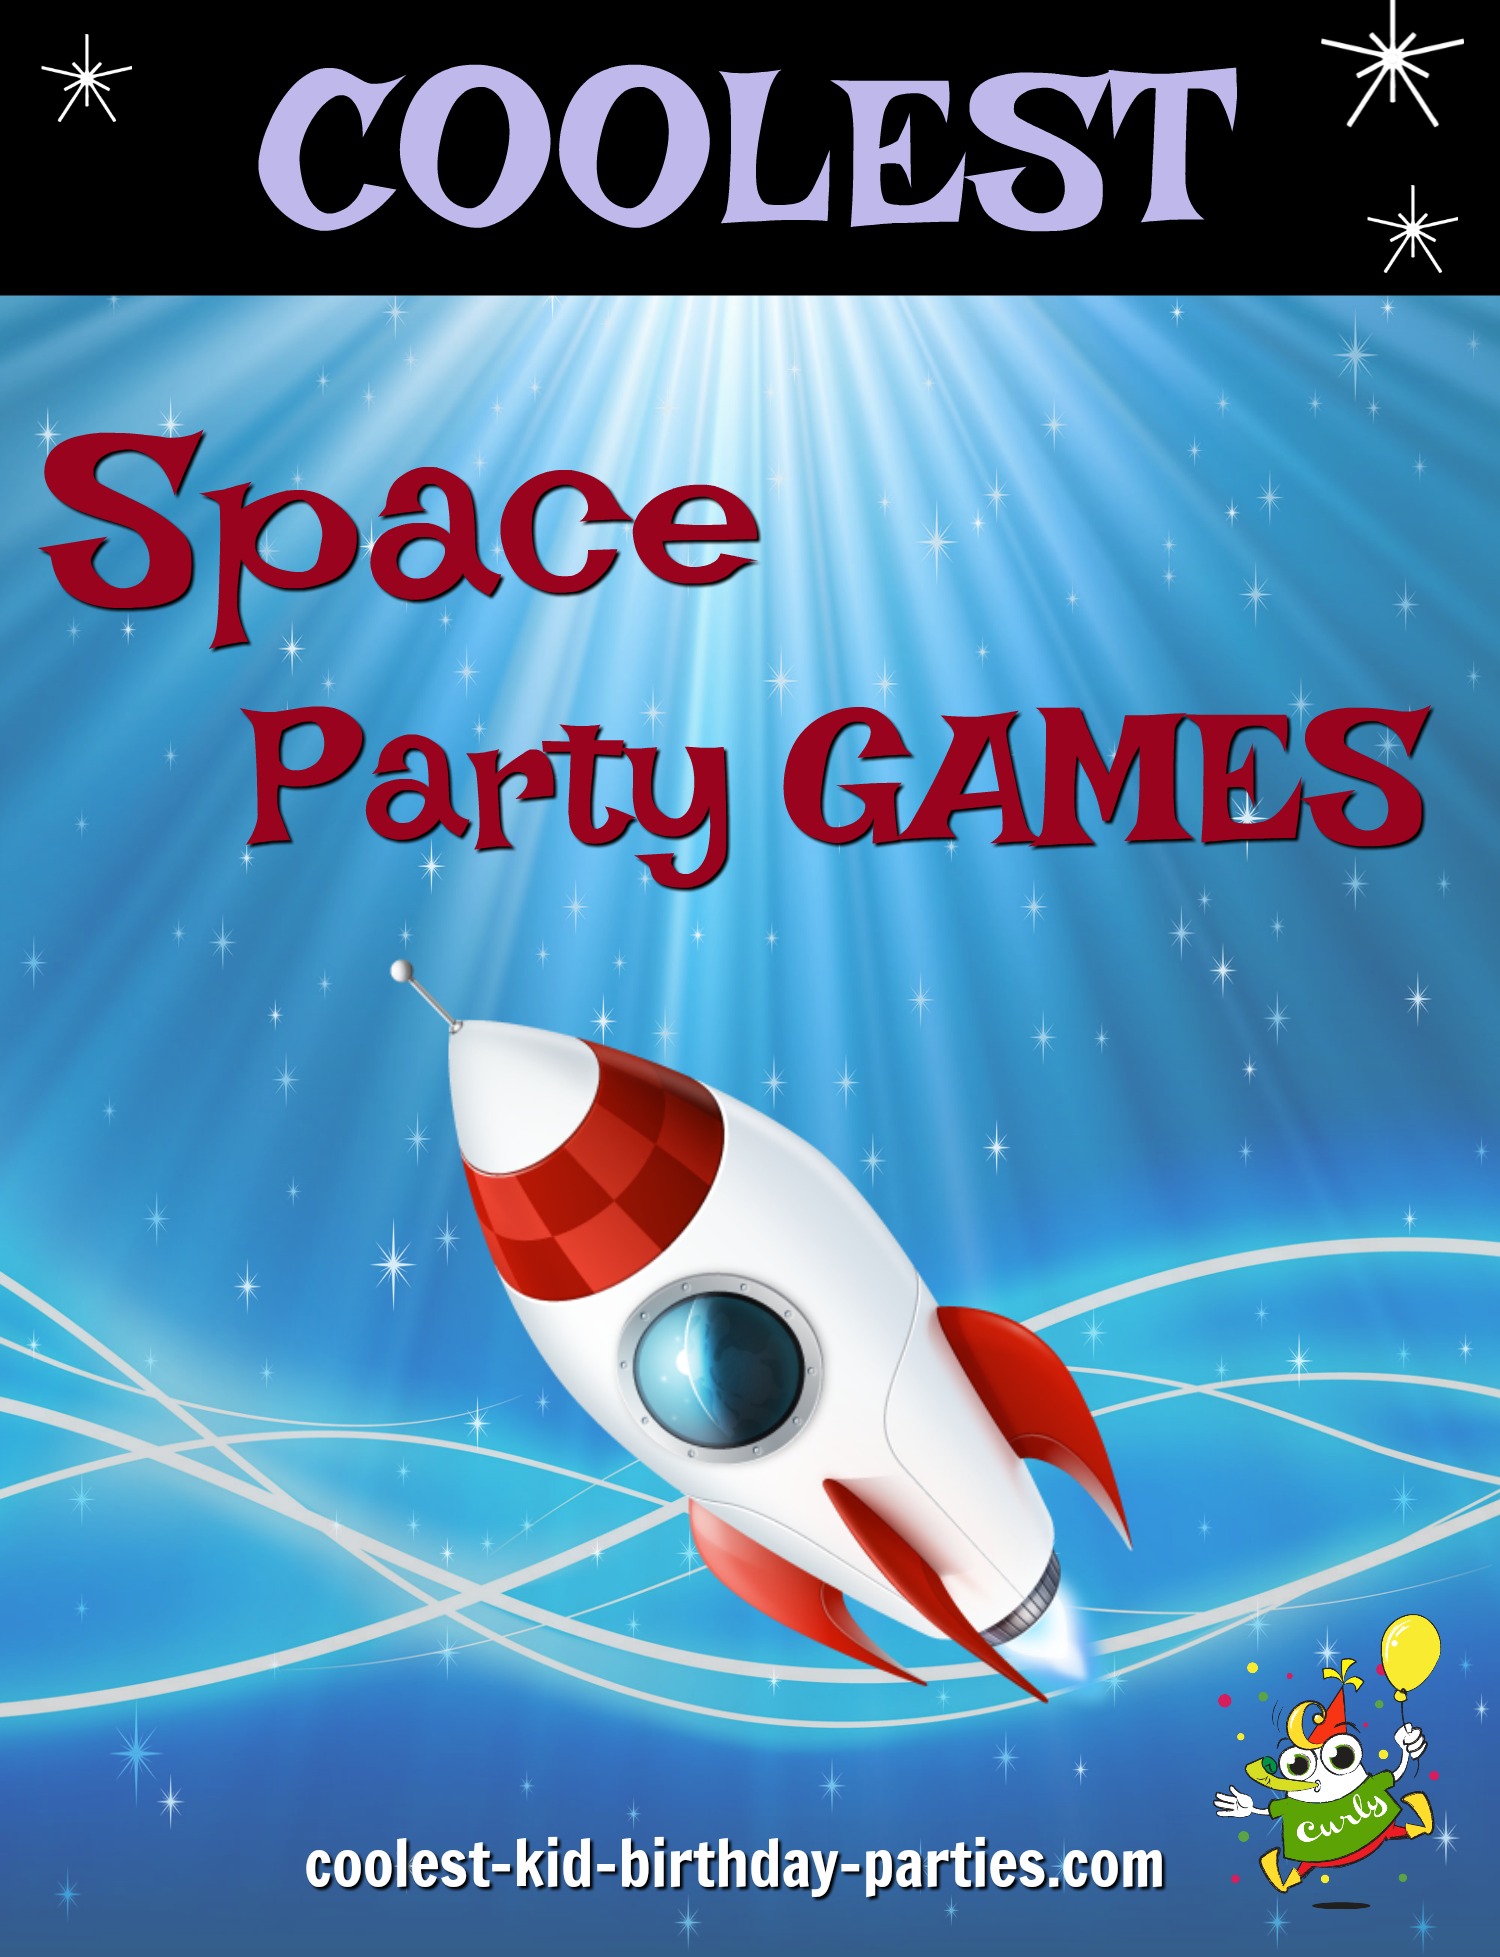 Space Child Party Games